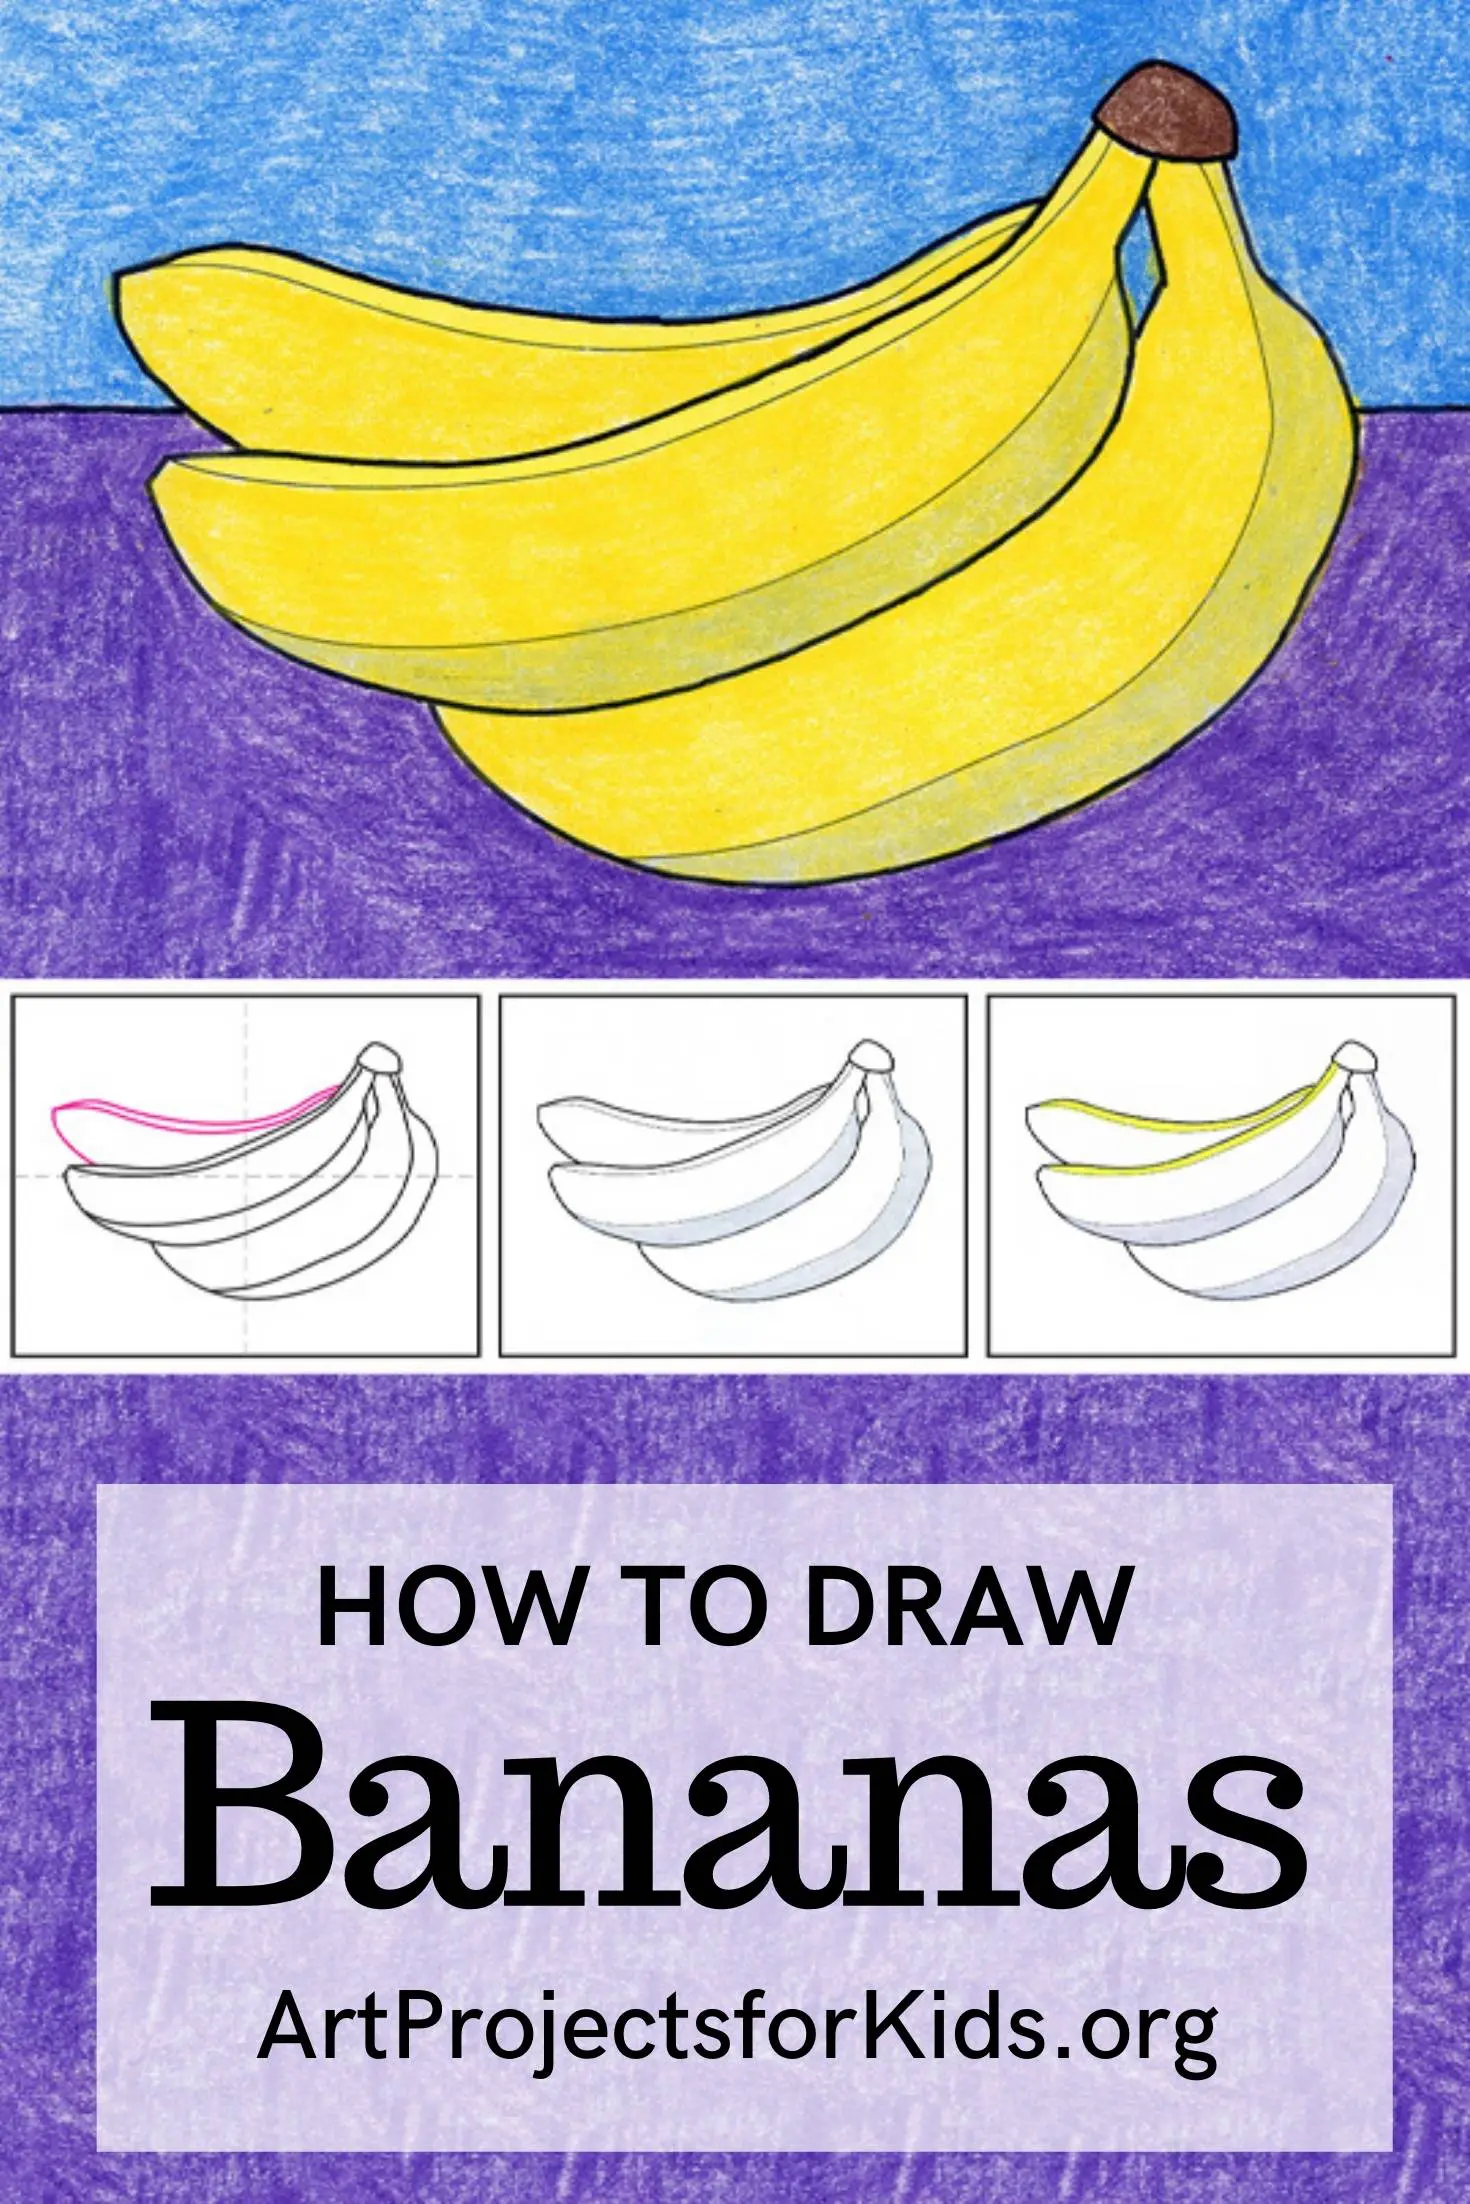 How to Draw a Banana - Easy Drawing Art